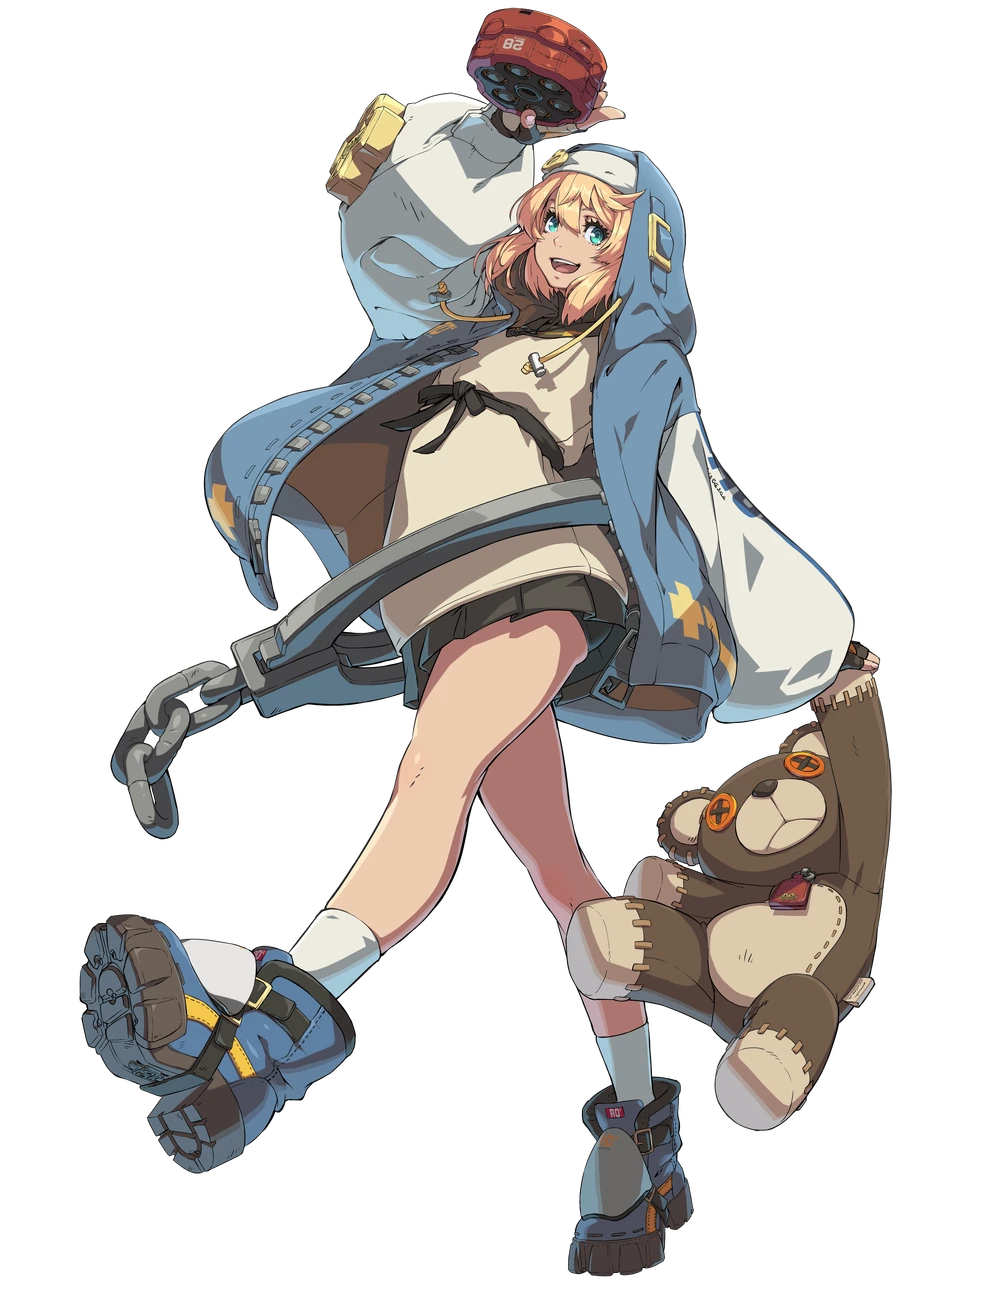 An illustration of a young blonde woman grinning at the camera with one leg extended in a walking pose. She wears a loose blue sweatshirt with white sleeves open over a tunic and short skirt, as well as big clompy boots. In one hand she holds a large yo-yo; from the other dangles a teddy bear. A giant manacle is loosely clasped around her stomach, the chain broken.